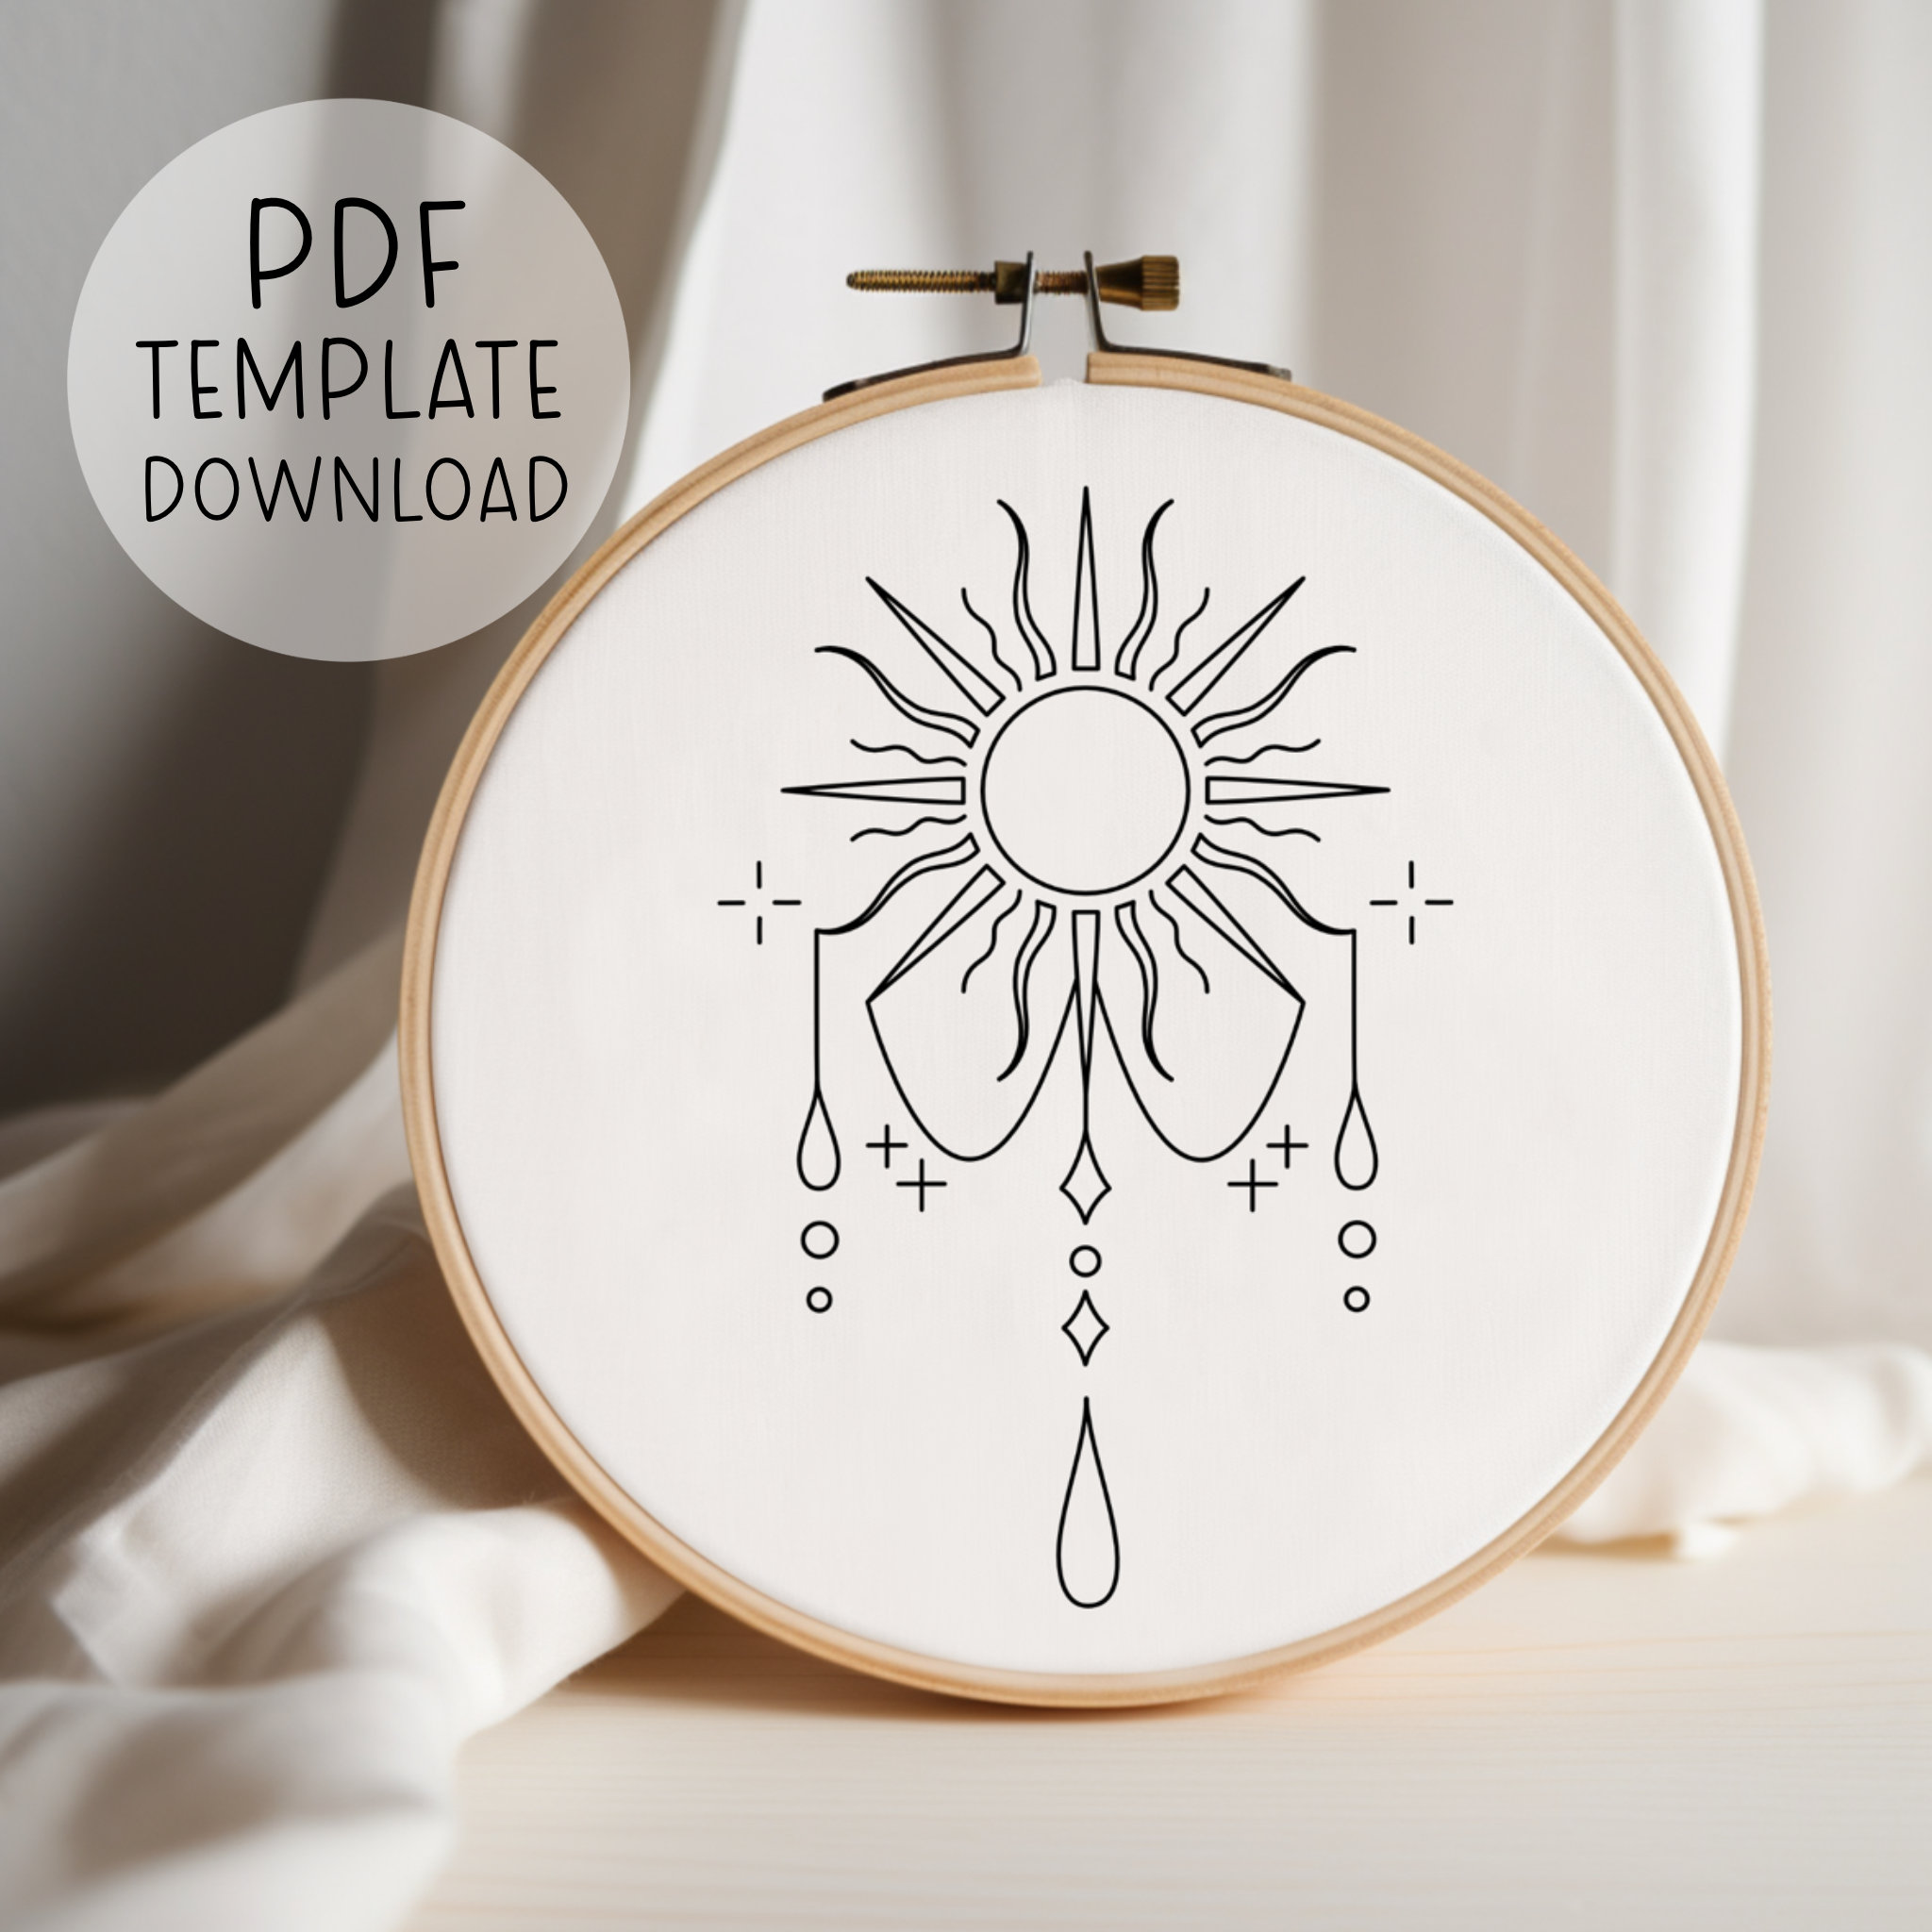  Celestial Embroidery Pattern Transfers (set of 10 hoop  designs!): 9781441326126: Peter Pauper Press, Inc.: Arts, Crafts & Sewing